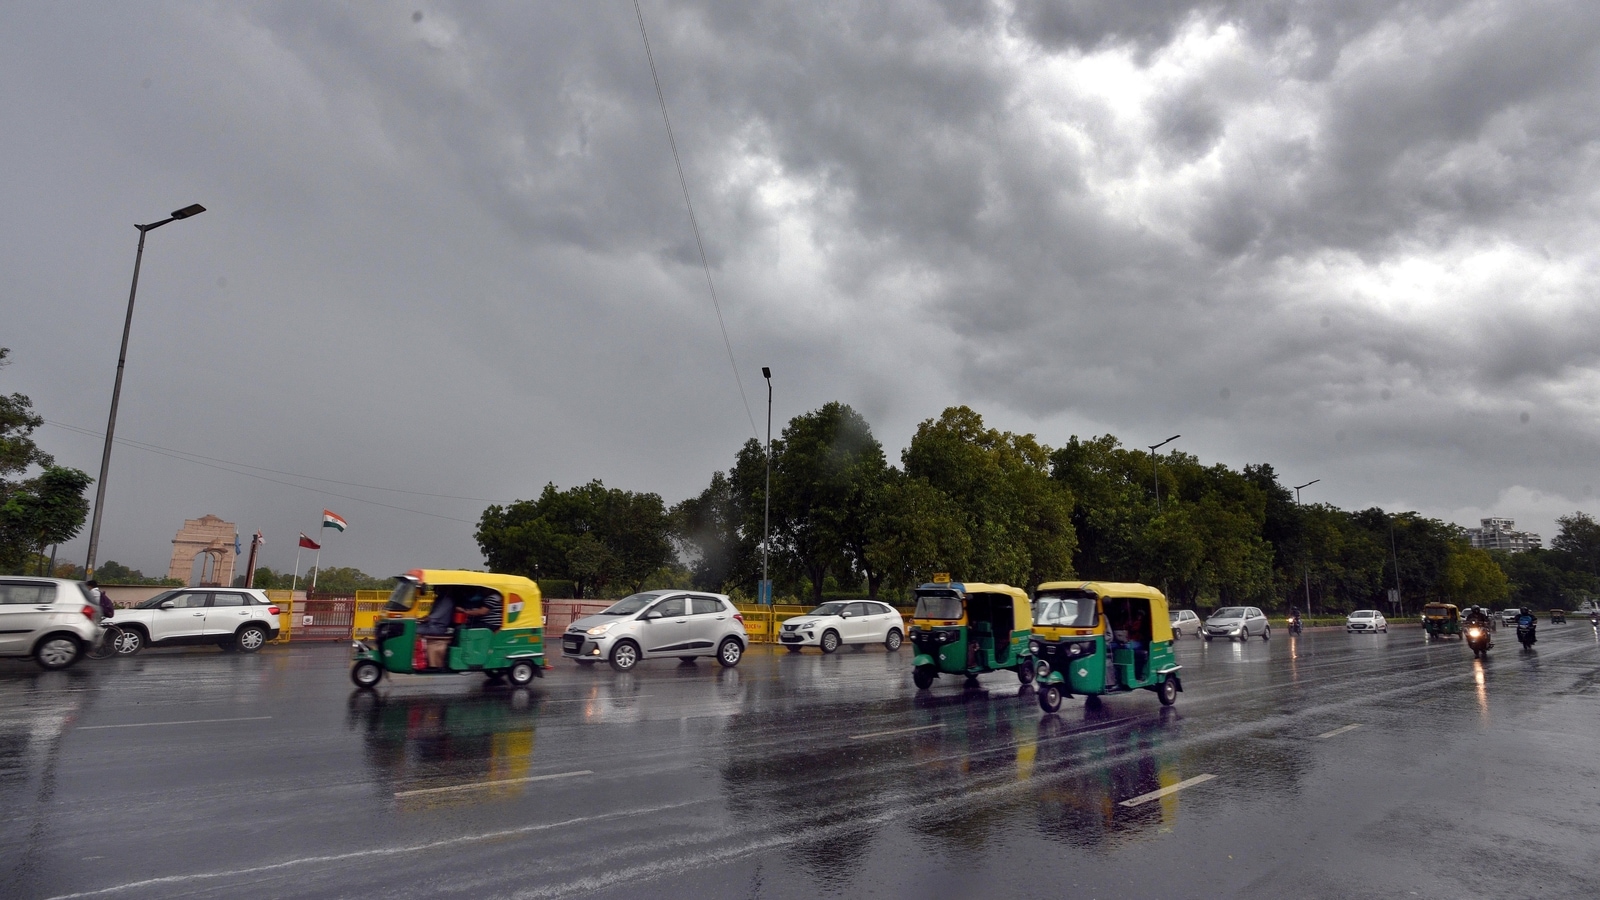 Photos Monsoon advances over Delhi, completes coverage over the